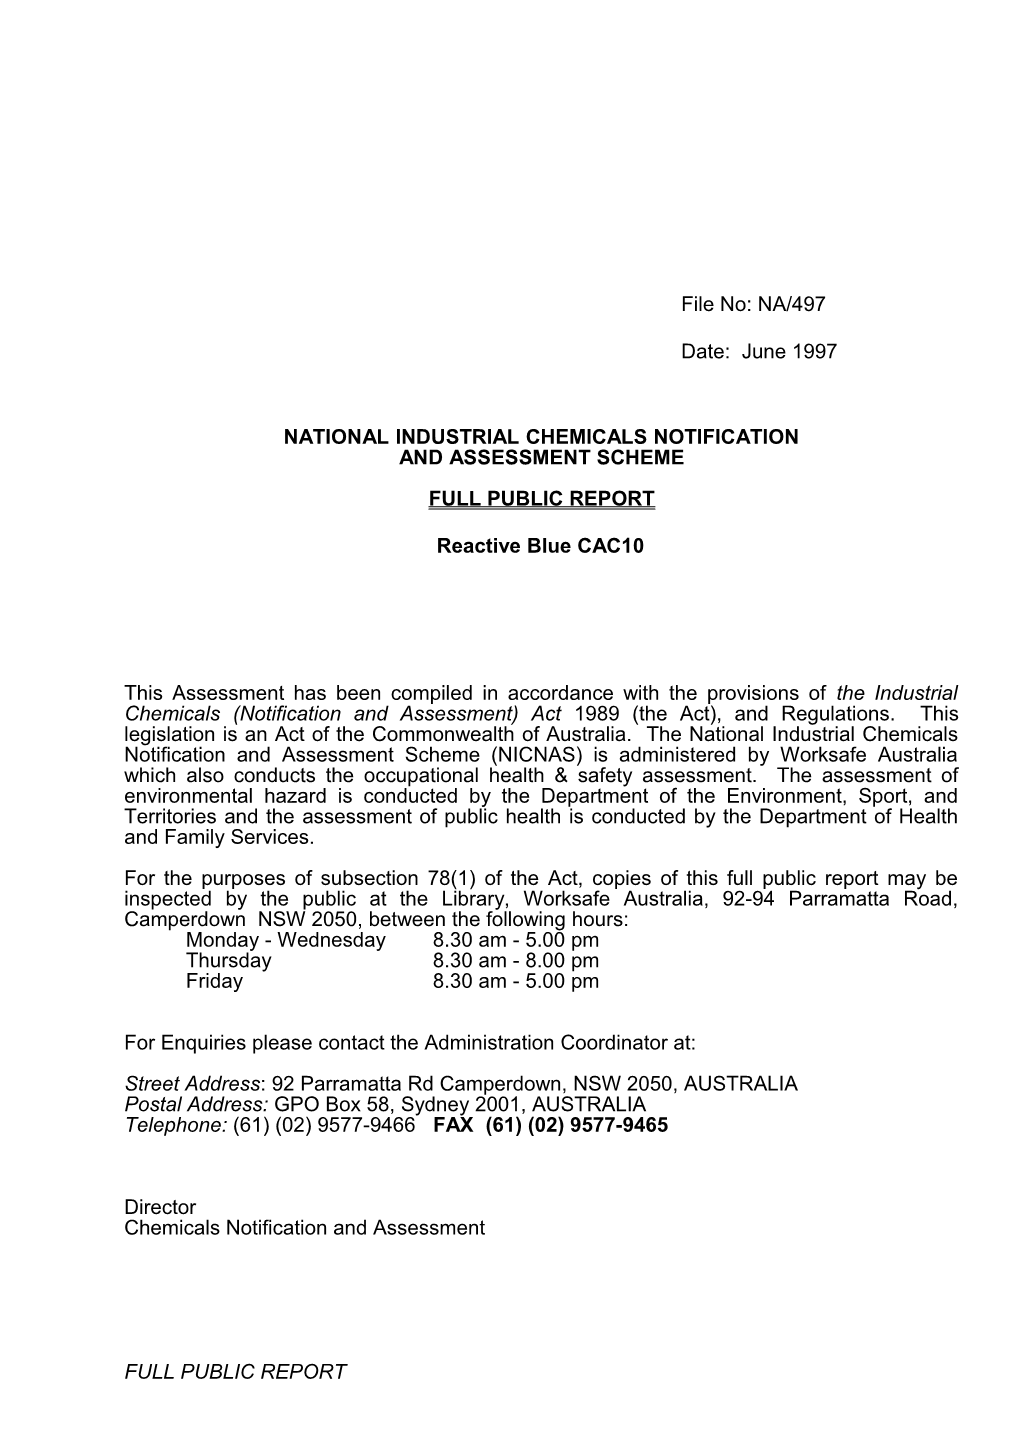 National Industrial Chemicals Notification s15